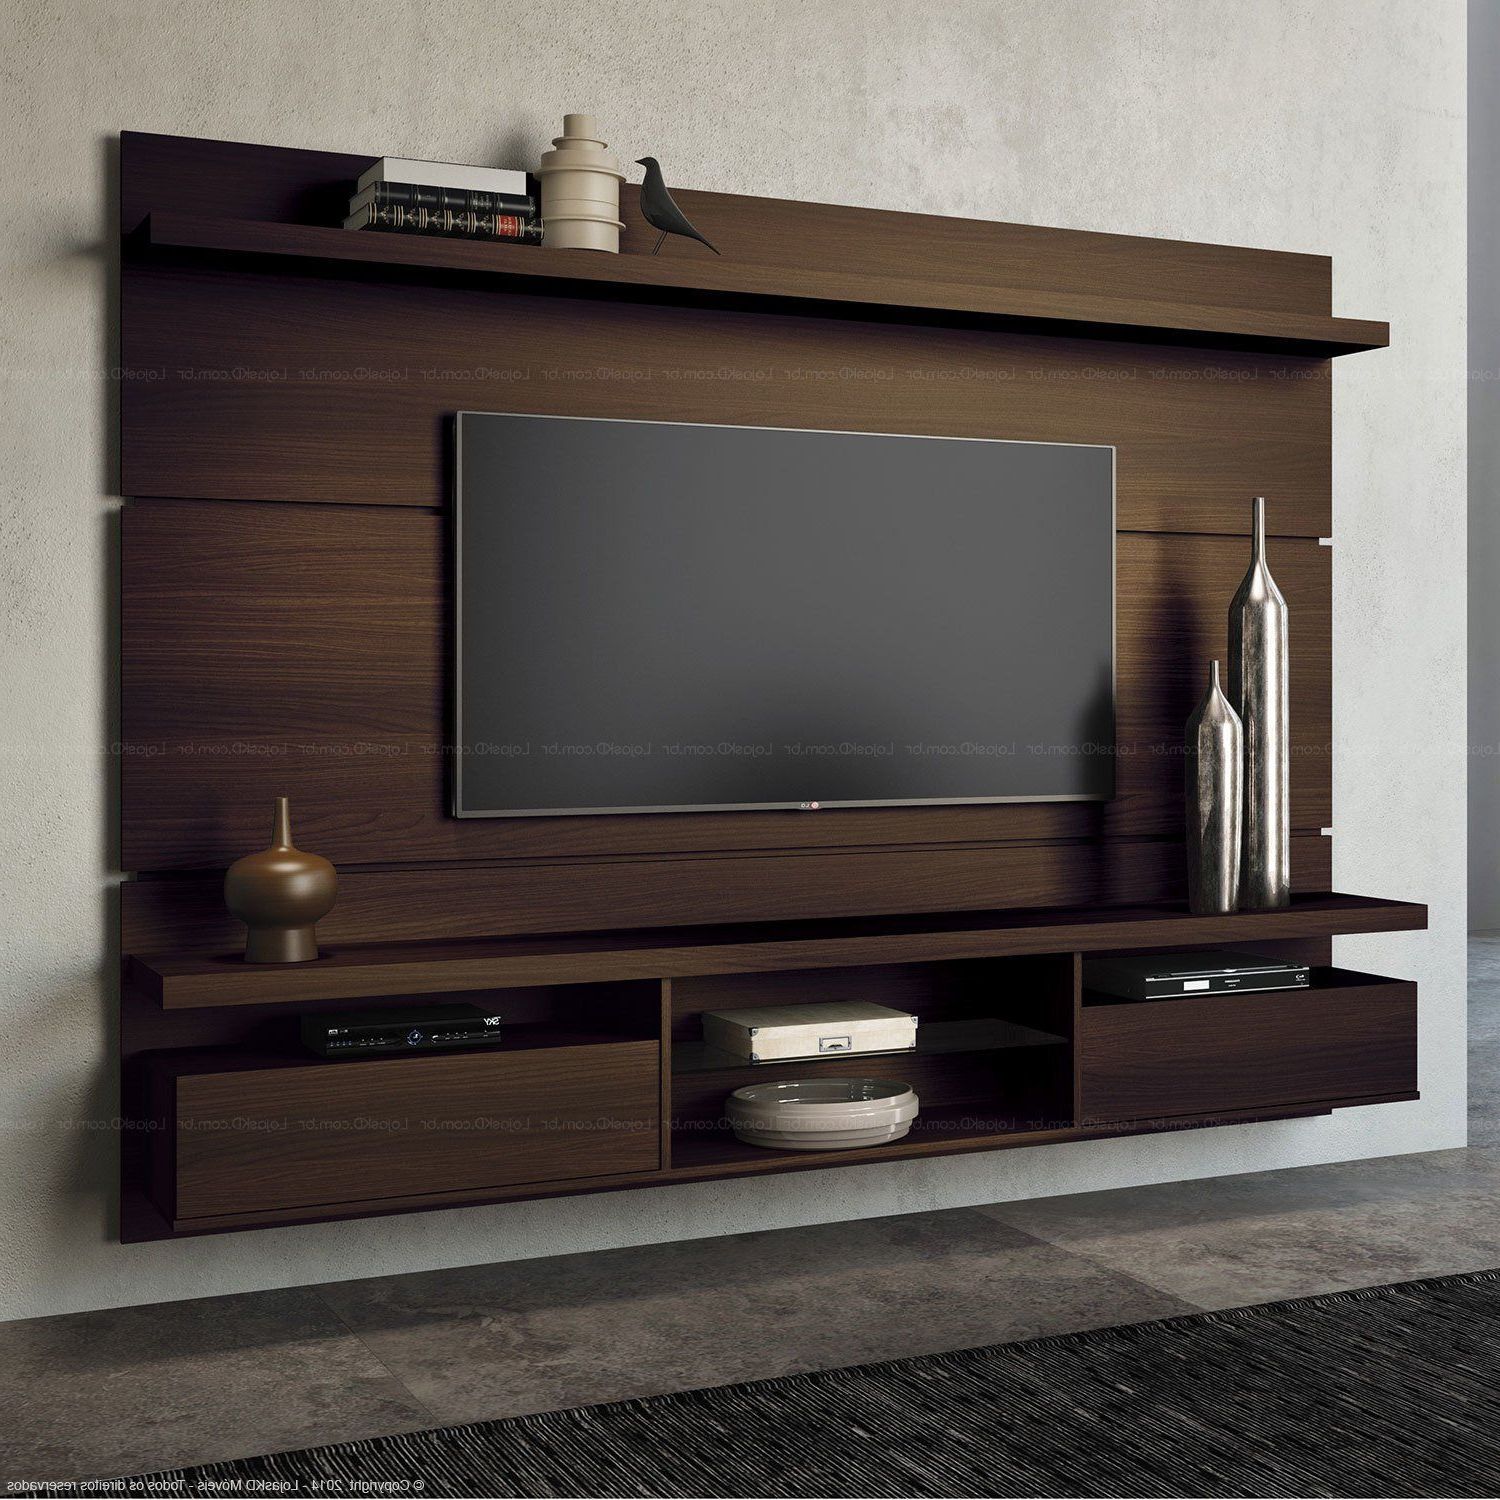 20 Collection of 60 Inch Tv Wall Units